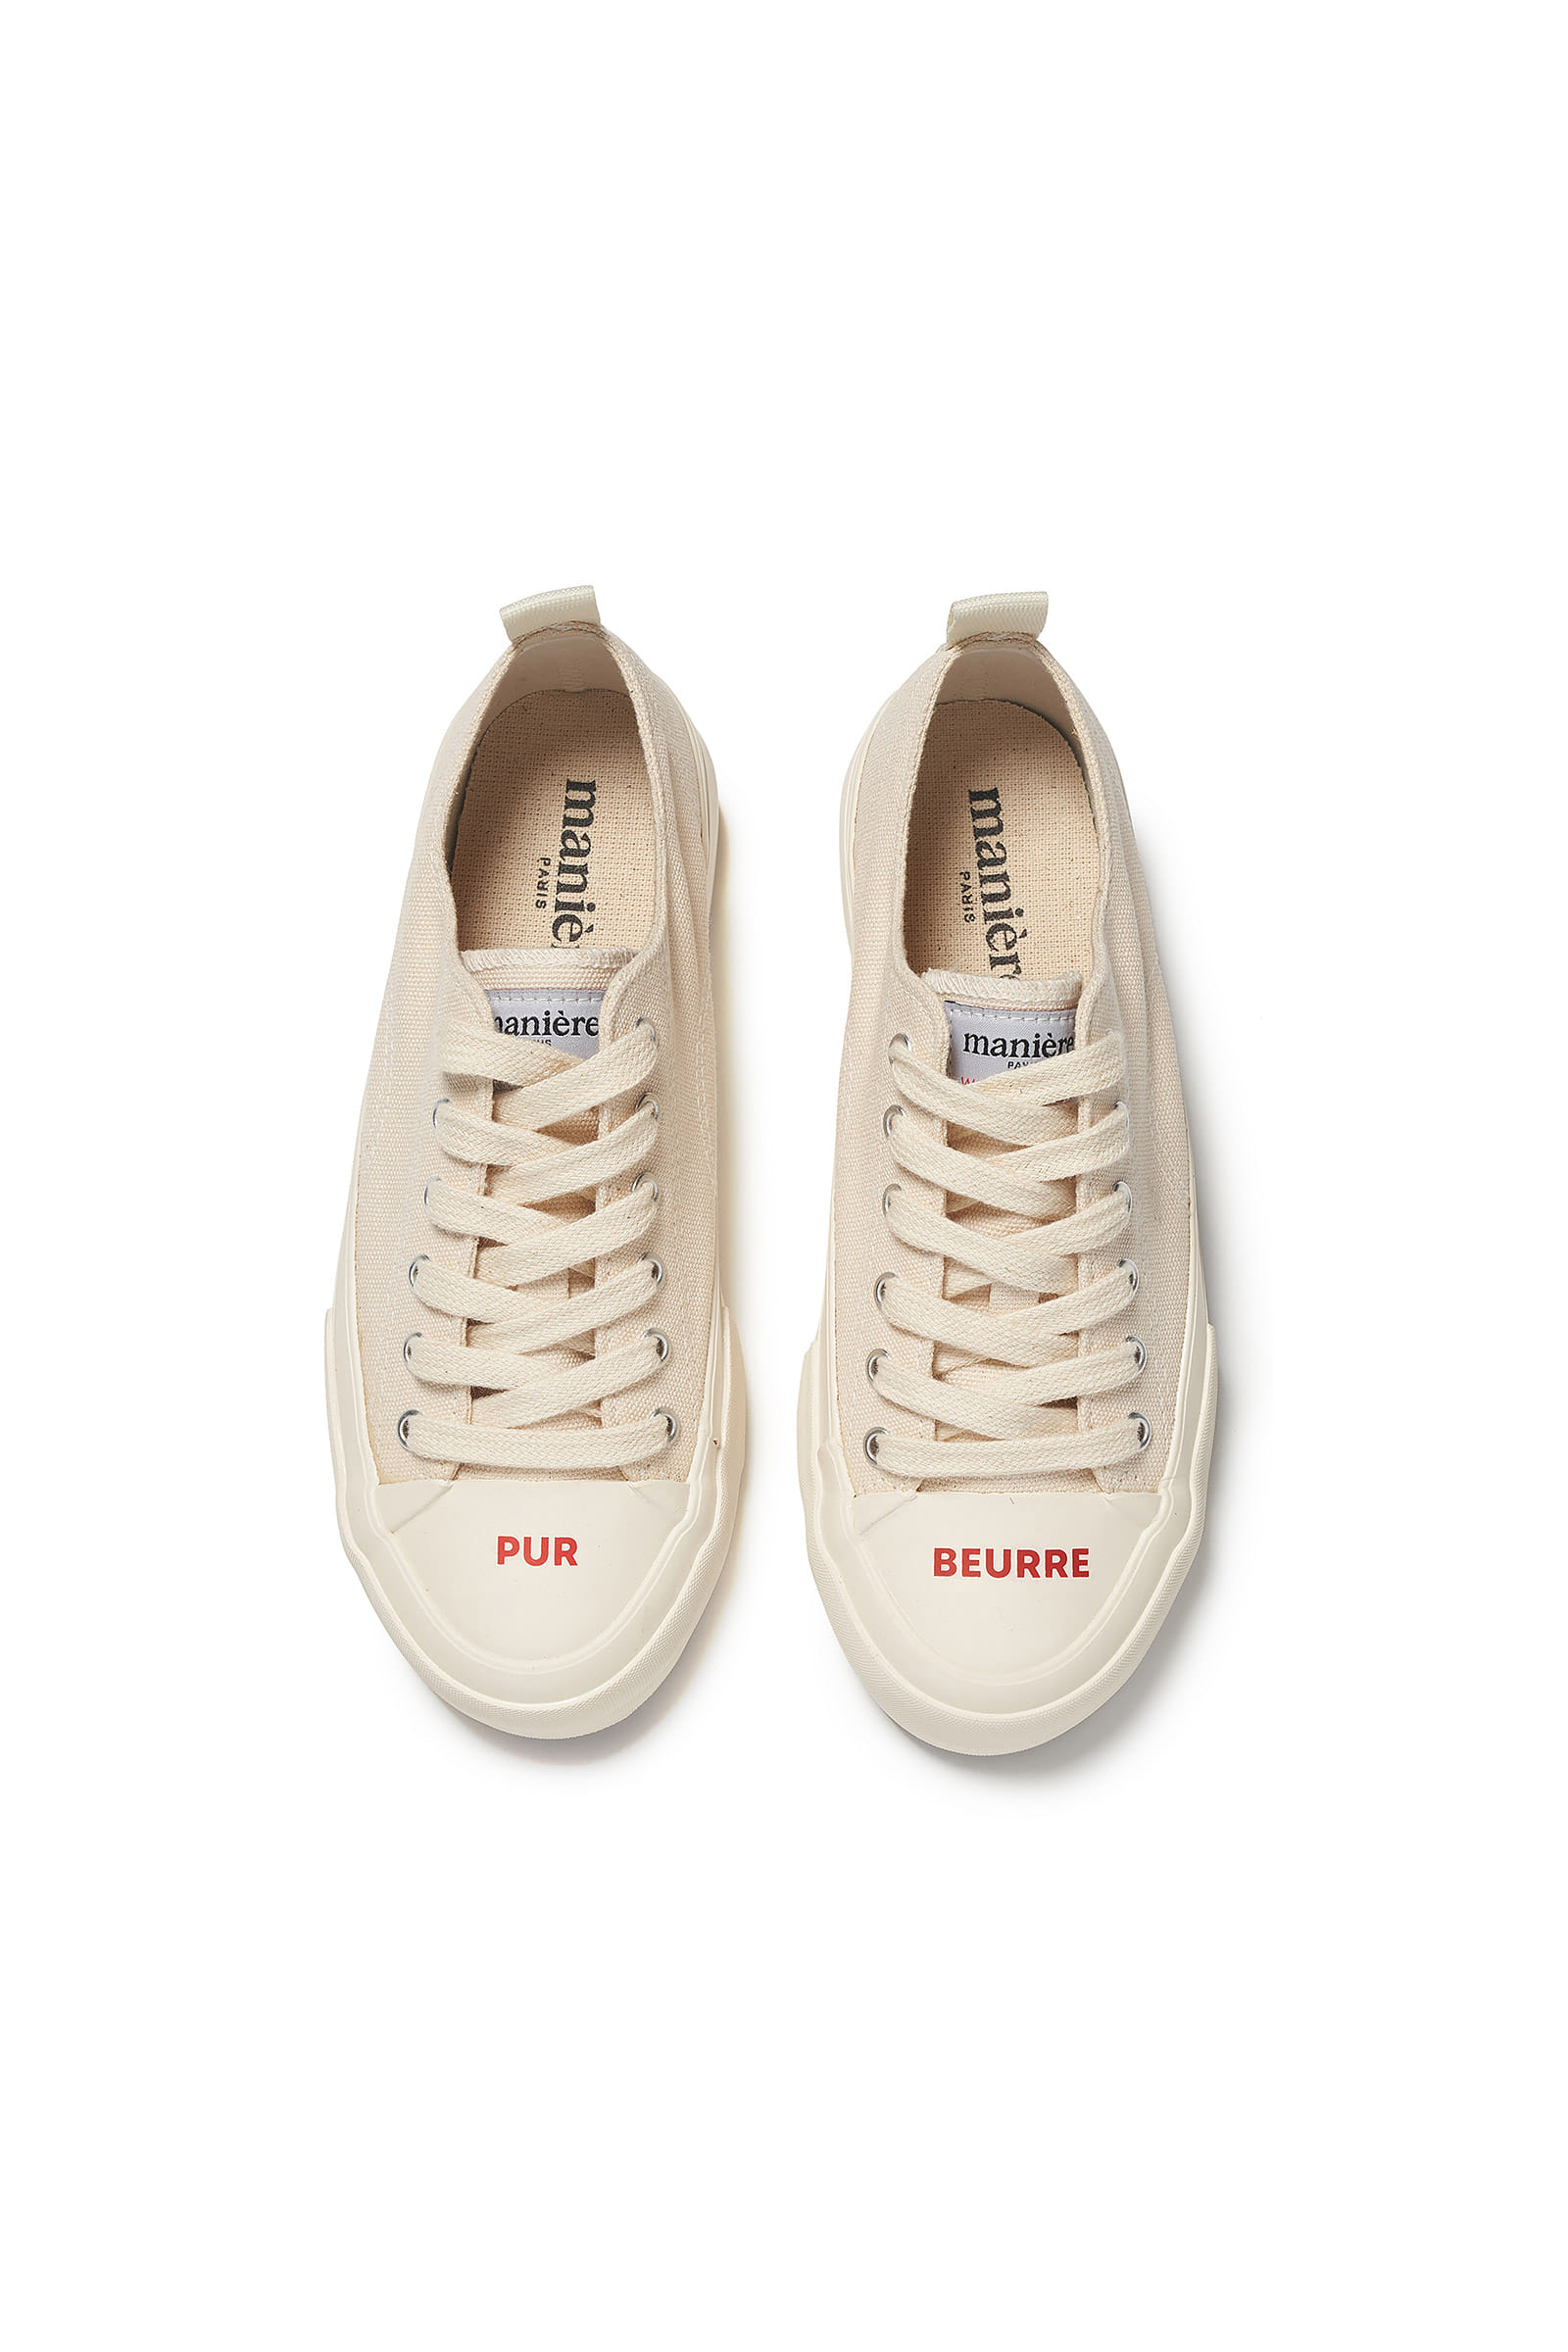 ep.2 Pur Beurre Sneakers(Ivory)